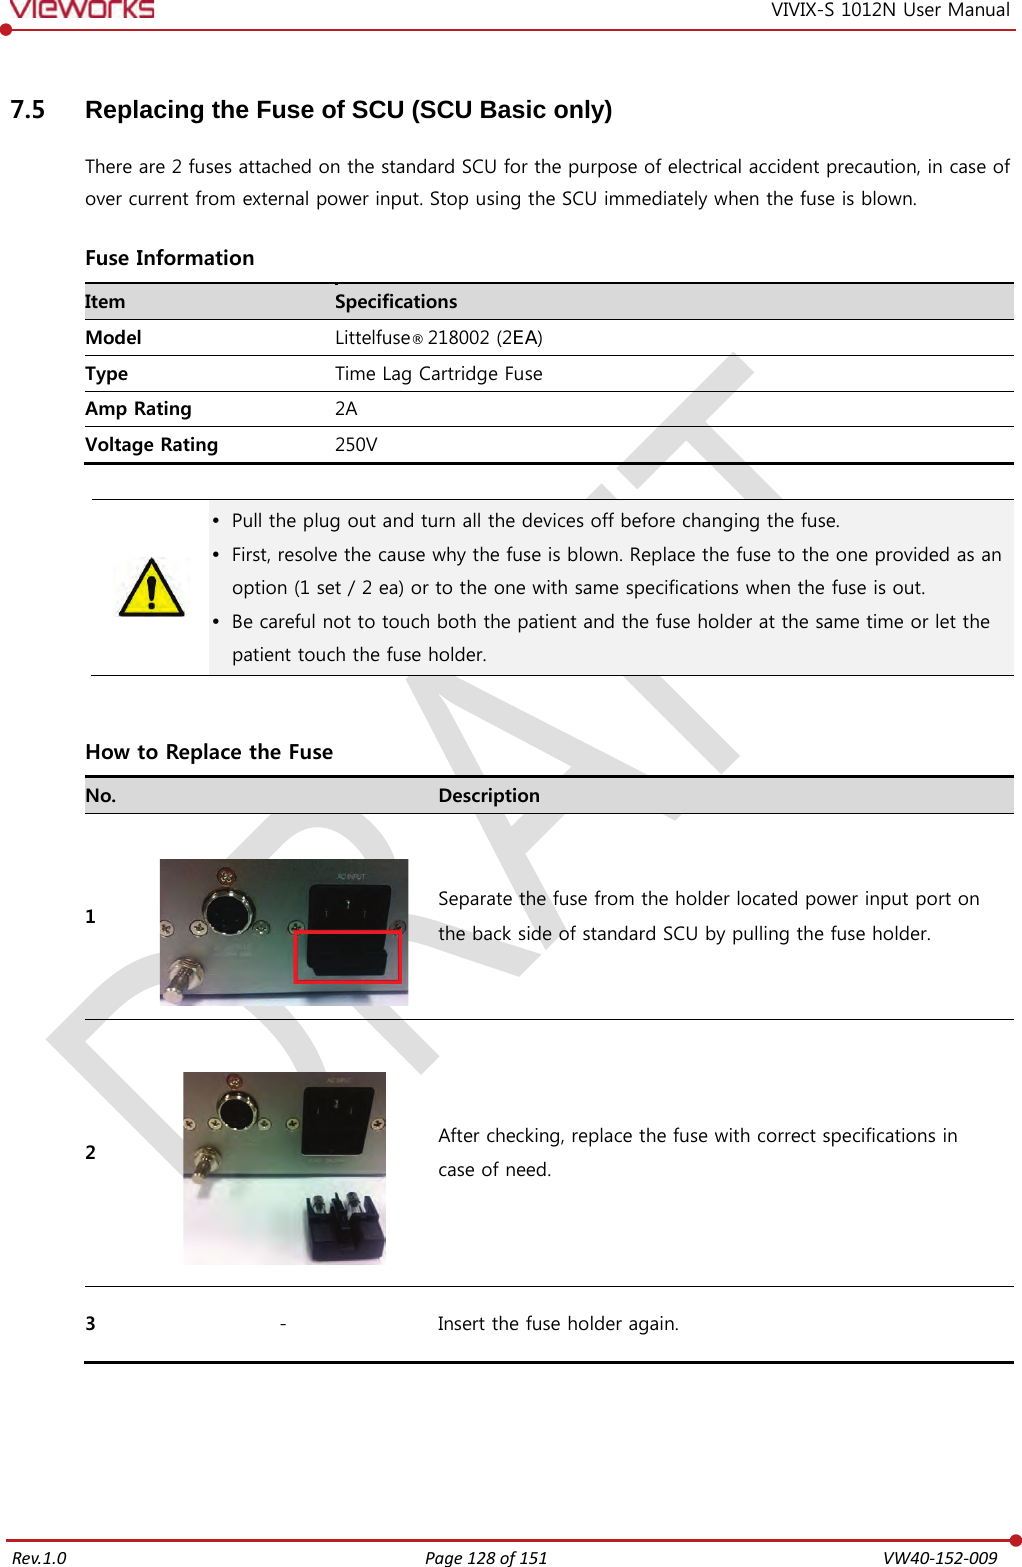   Rev.1.0 Page 128 of 151  VW40-152-009 VIVIX-S 1012N User Manual 7.5 Replacing the Fuse of SCU (SCU Basic only) There are 2 fuses attached on the standard SCU for the purpose of electrical accident precaution, in case of over current from external power input. Stop using the SCU immediately when the fuse is blown.  Fuse Information Item Specifications Model Littelfuse® 218002 (2EA) Type Time Lag Cartridge Fuse Amp Rating 2A Voltage Rating 250V    Pull the plug out and turn all the devices off before changing the fuse.  First, resolve the cause why the fuse is blown. Replace the fuse to the one provided as an option (1 set / 2 ea) or to the one with same specifications when the fuse is out.  Be careful not to touch both the patient and the fuse holder at the same time or let the patient touch the fuse holder.   How to Replace the Fuse No.  Description 1   Separate the fuse from the holder located power input port on  the back side of standard SCU by pulling the fuse holder. 2   After checking, replace the fuse with correct specifications in  case of need. 3 - Insert the fuse holder again.   